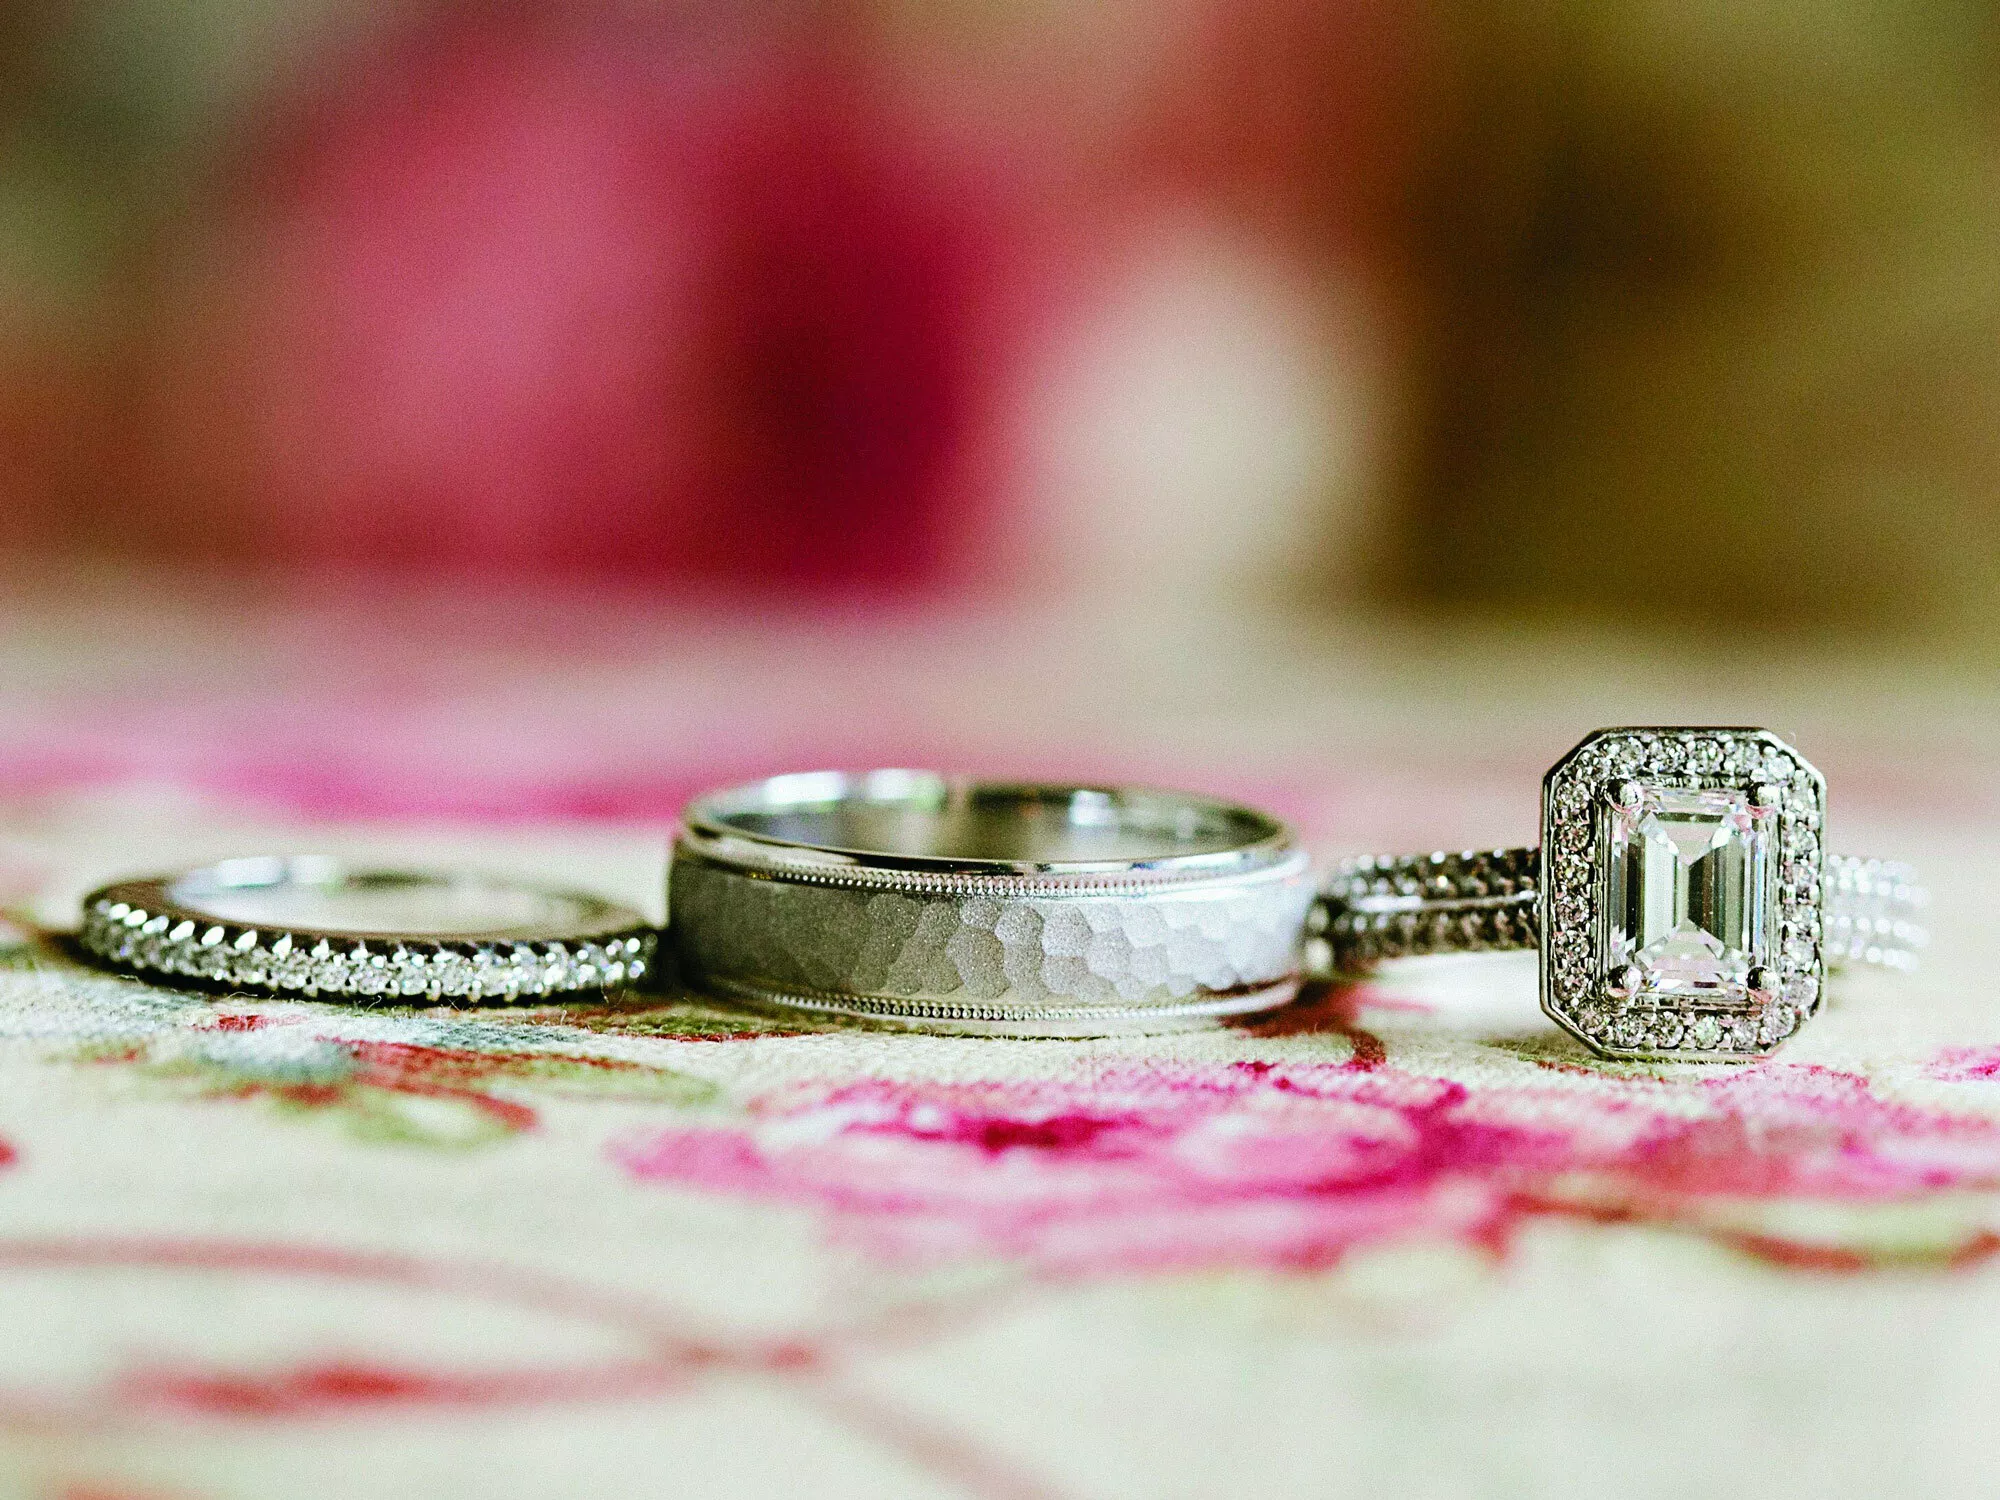 How to find the perfect wedding rings online in Singapore?